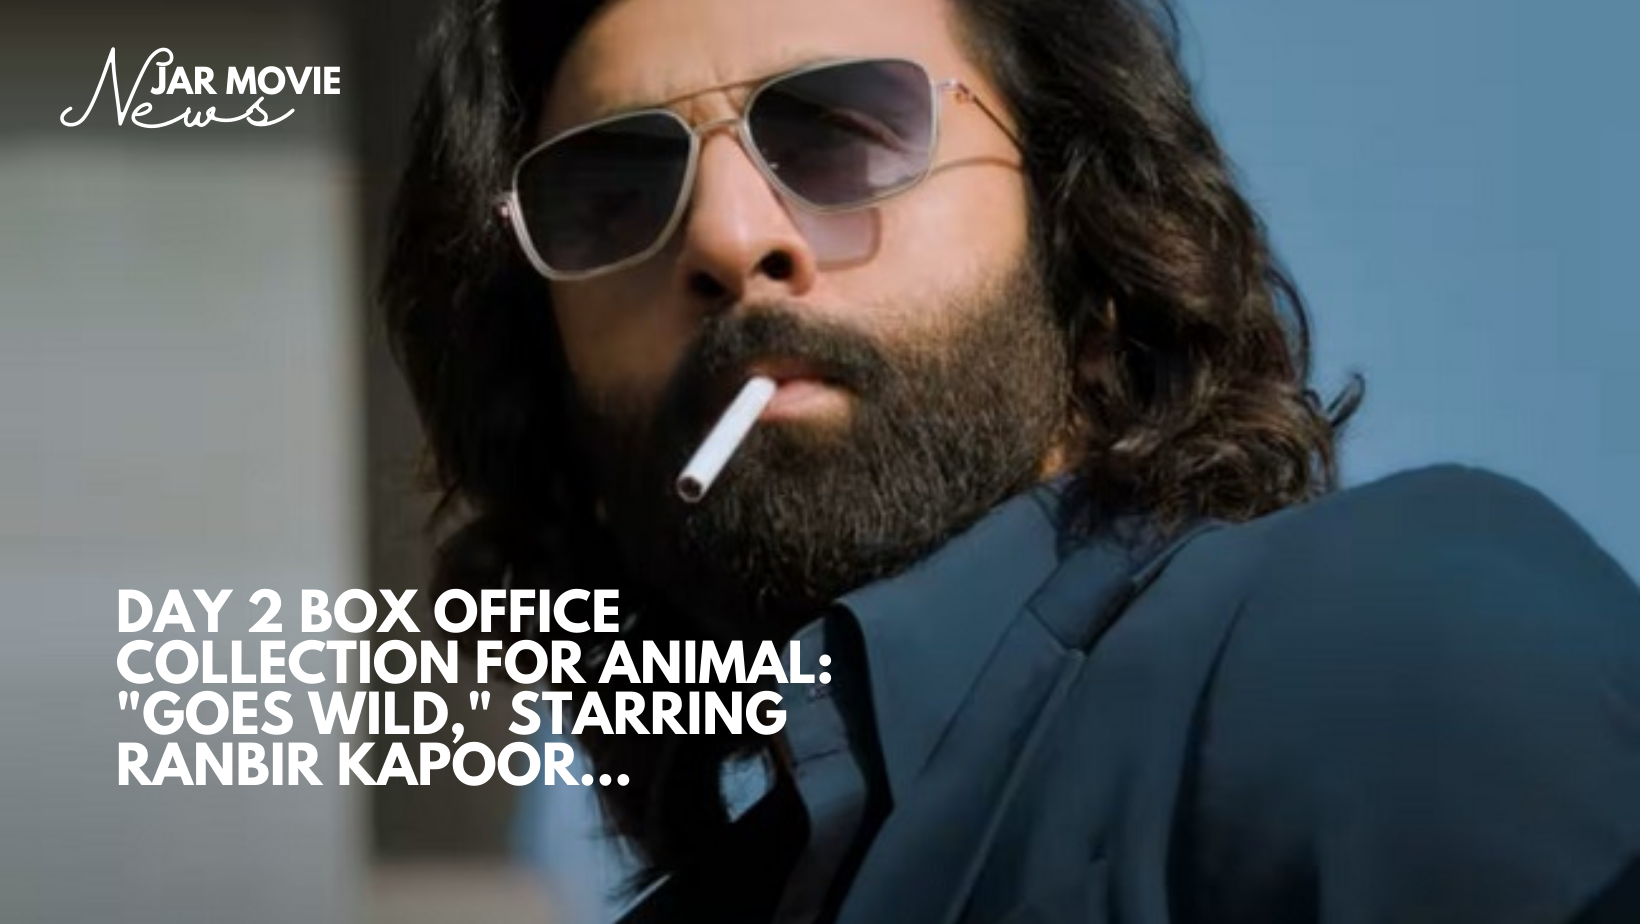 Day 2 Box Office Collection for Animal: "Goes Wild," starring Ranbir Kapoor…